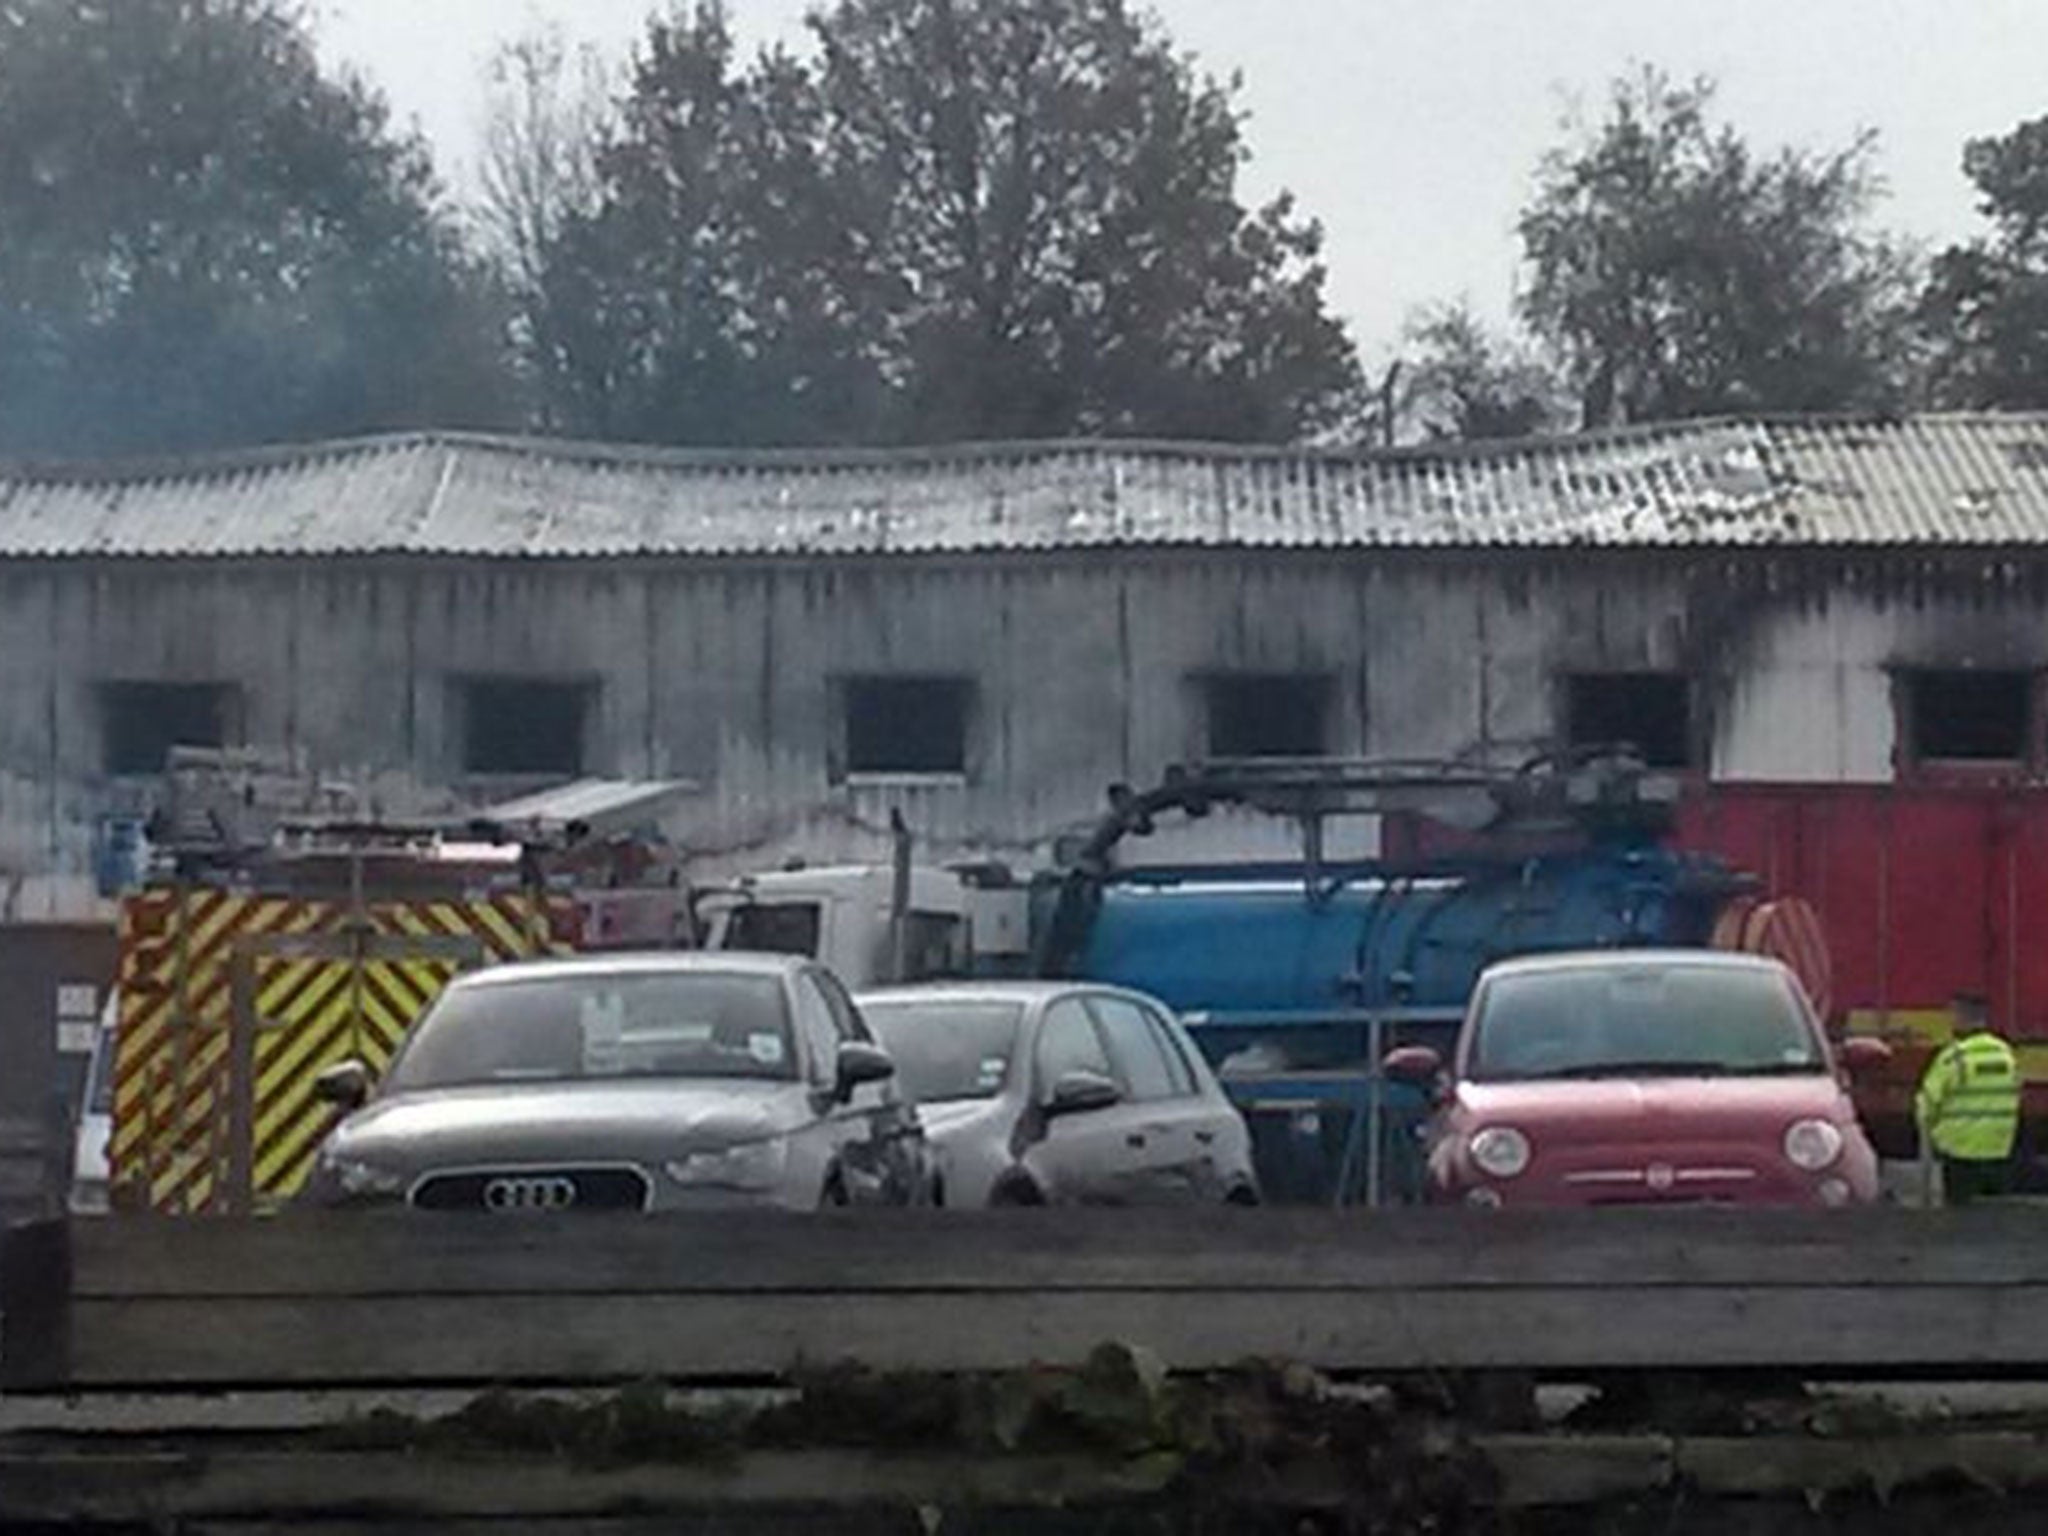 Smoke at the scene of a fire at a fireworks factory in Stafford, as rescue workers planned to begin their search for the missing people once the premises were deemed safe.